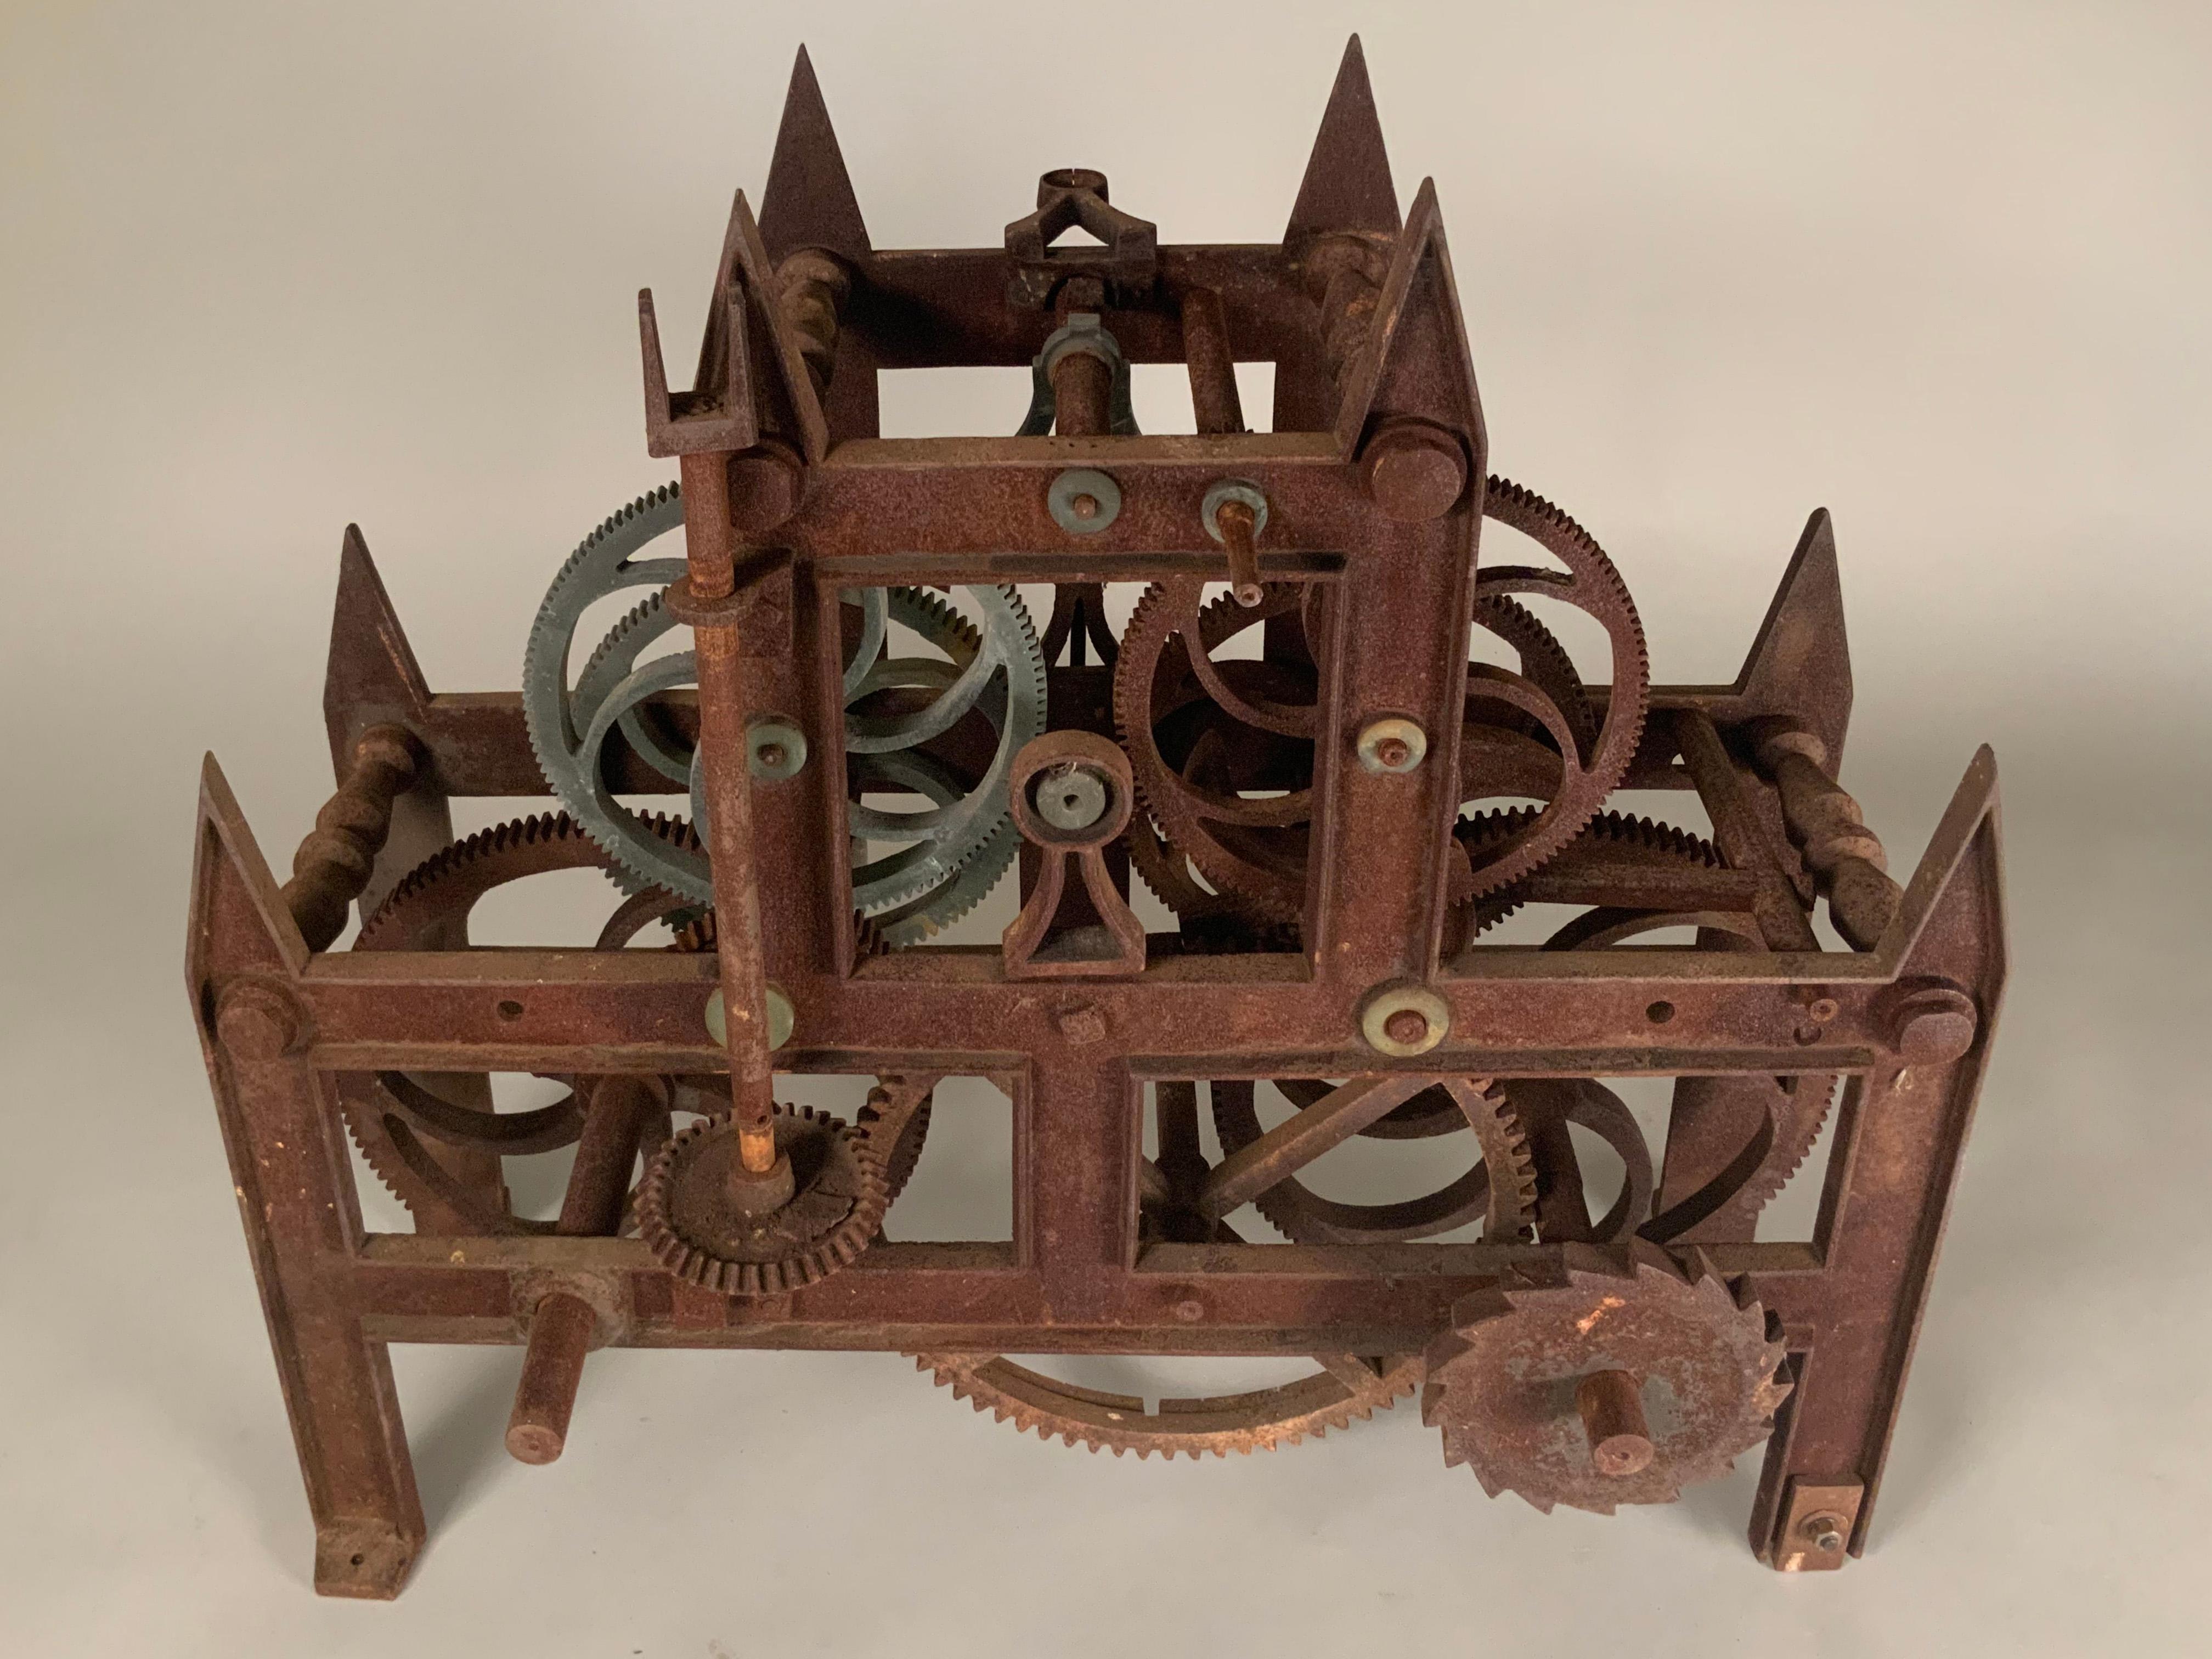 A large and intricate antique 19th century cast iron clockworks from a clock tower. Beautiful gothic design filled with gears which still turn and are interconnected. A wonderful piece of sculptural decorative art.